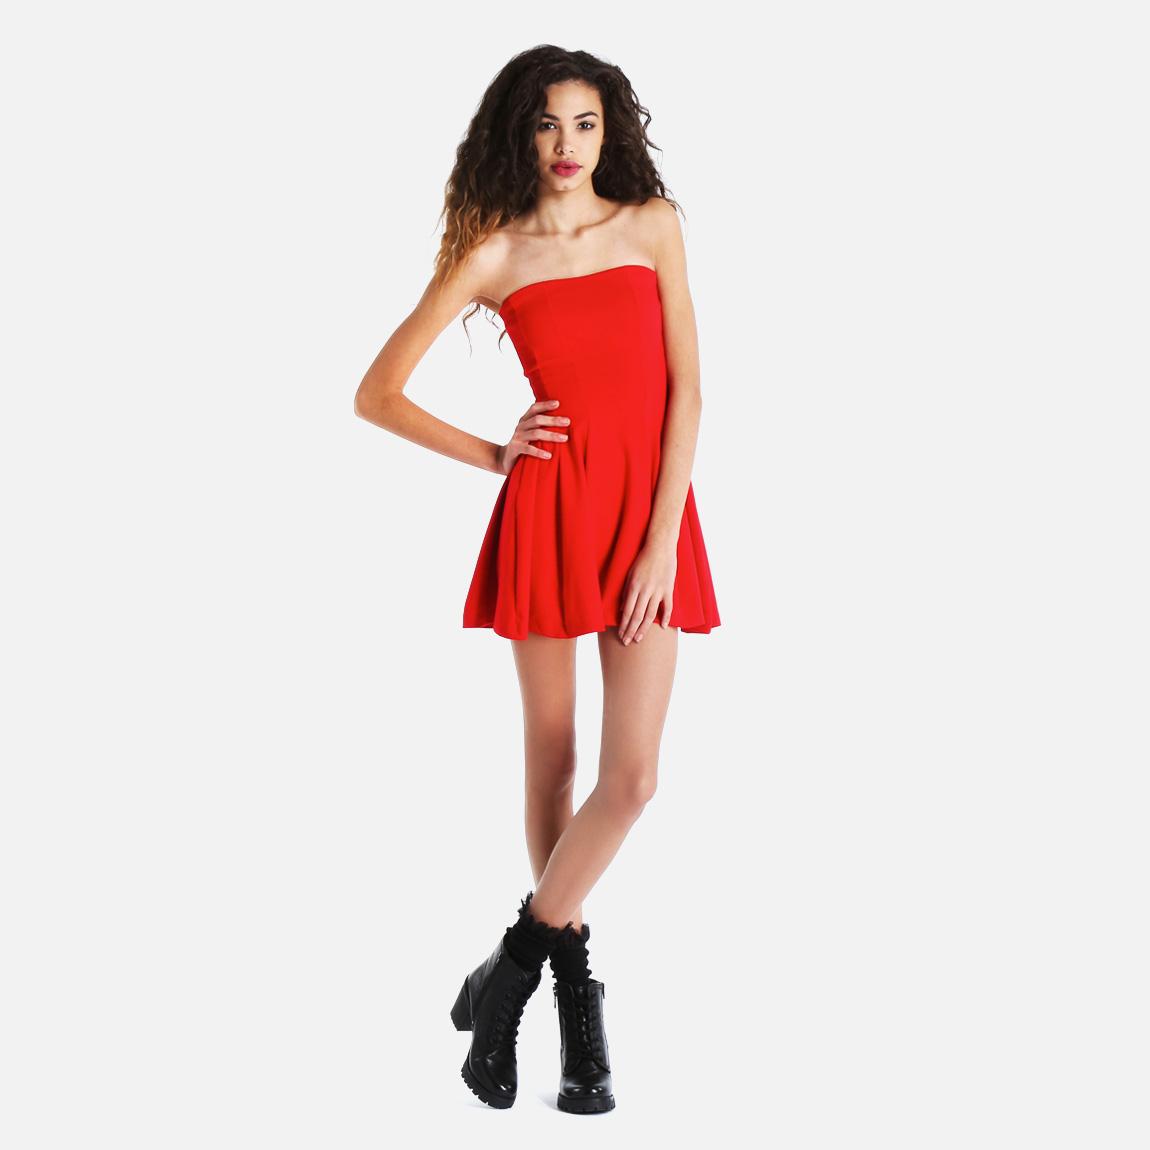 FLASHDANCE STRAPLESS DRESS - RED The Lot Occasion | Superbalist.com